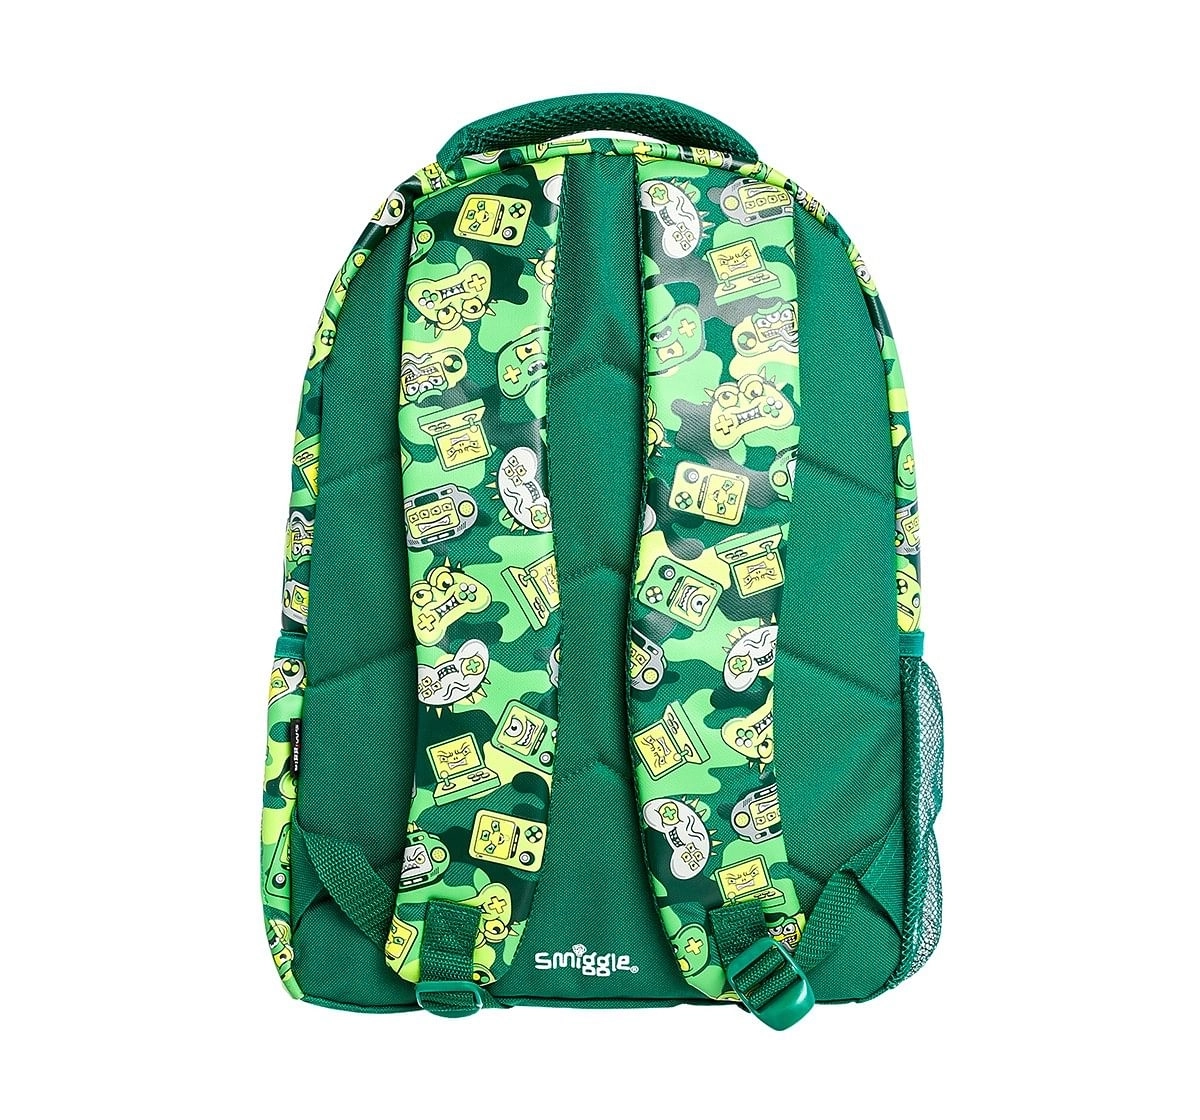 Smiggle Far Away Backpack - Gaming Print Bags for Kids age 3Y+ (Green)